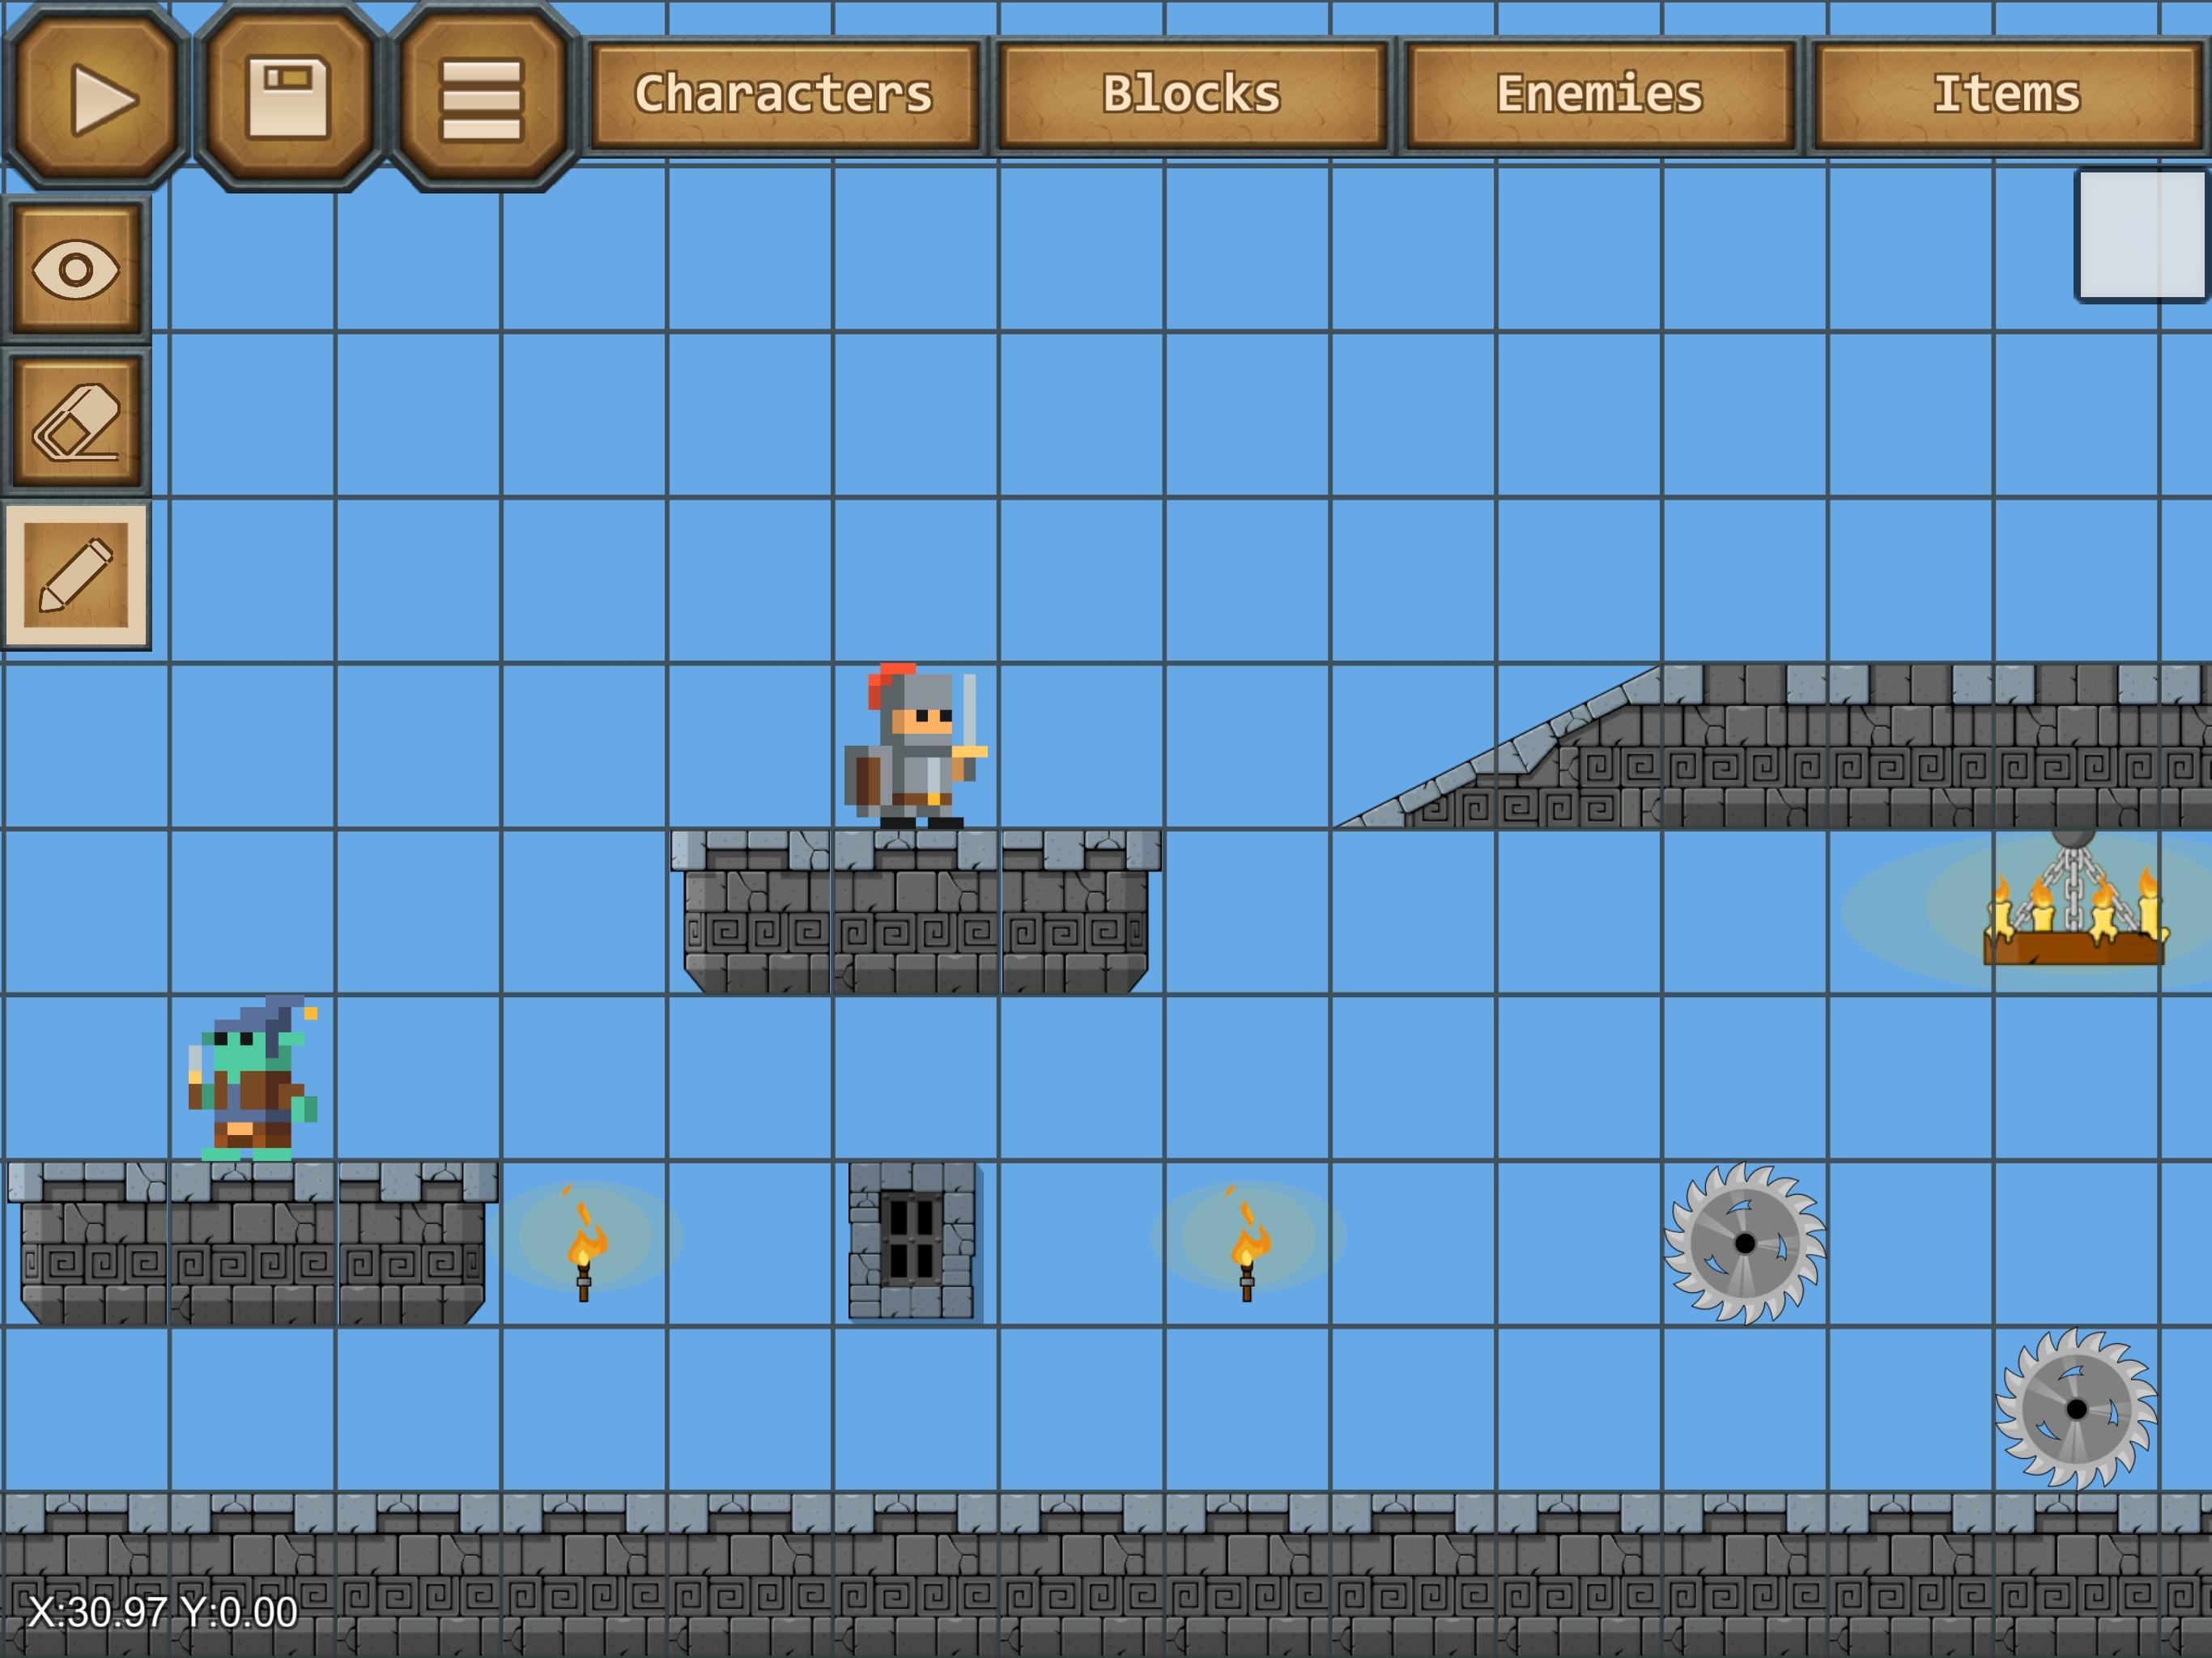 Epic Game Maker Create and Share Your Levels 1.9 Screenshot 12